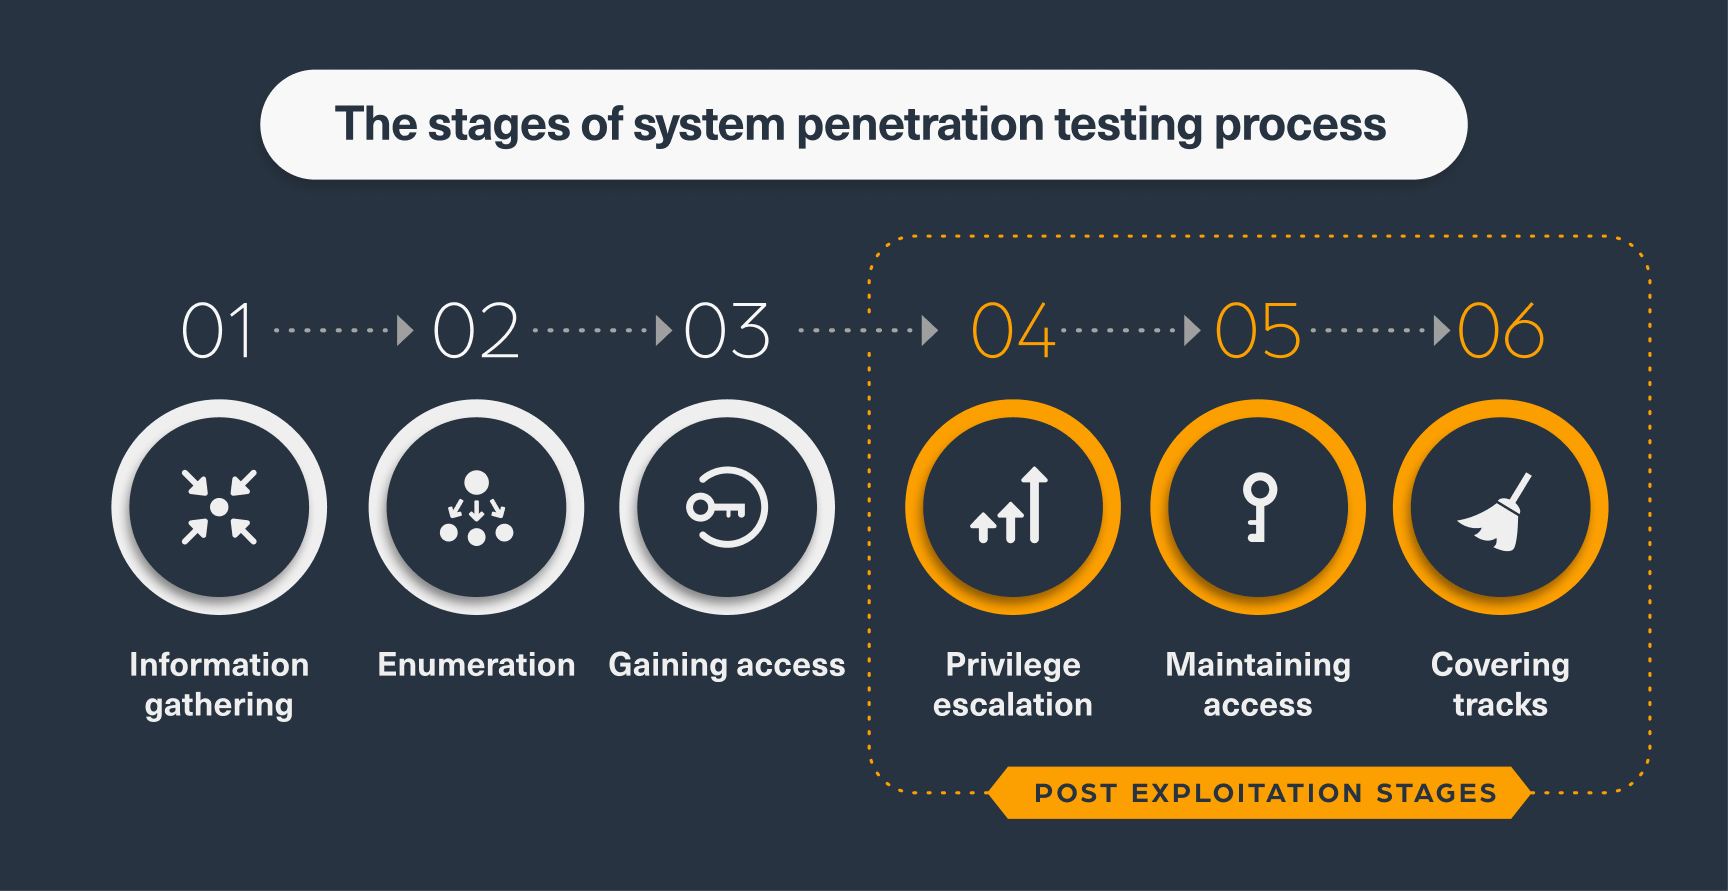 The stages of system penetration testing process, with post-exploitation stages highlighted